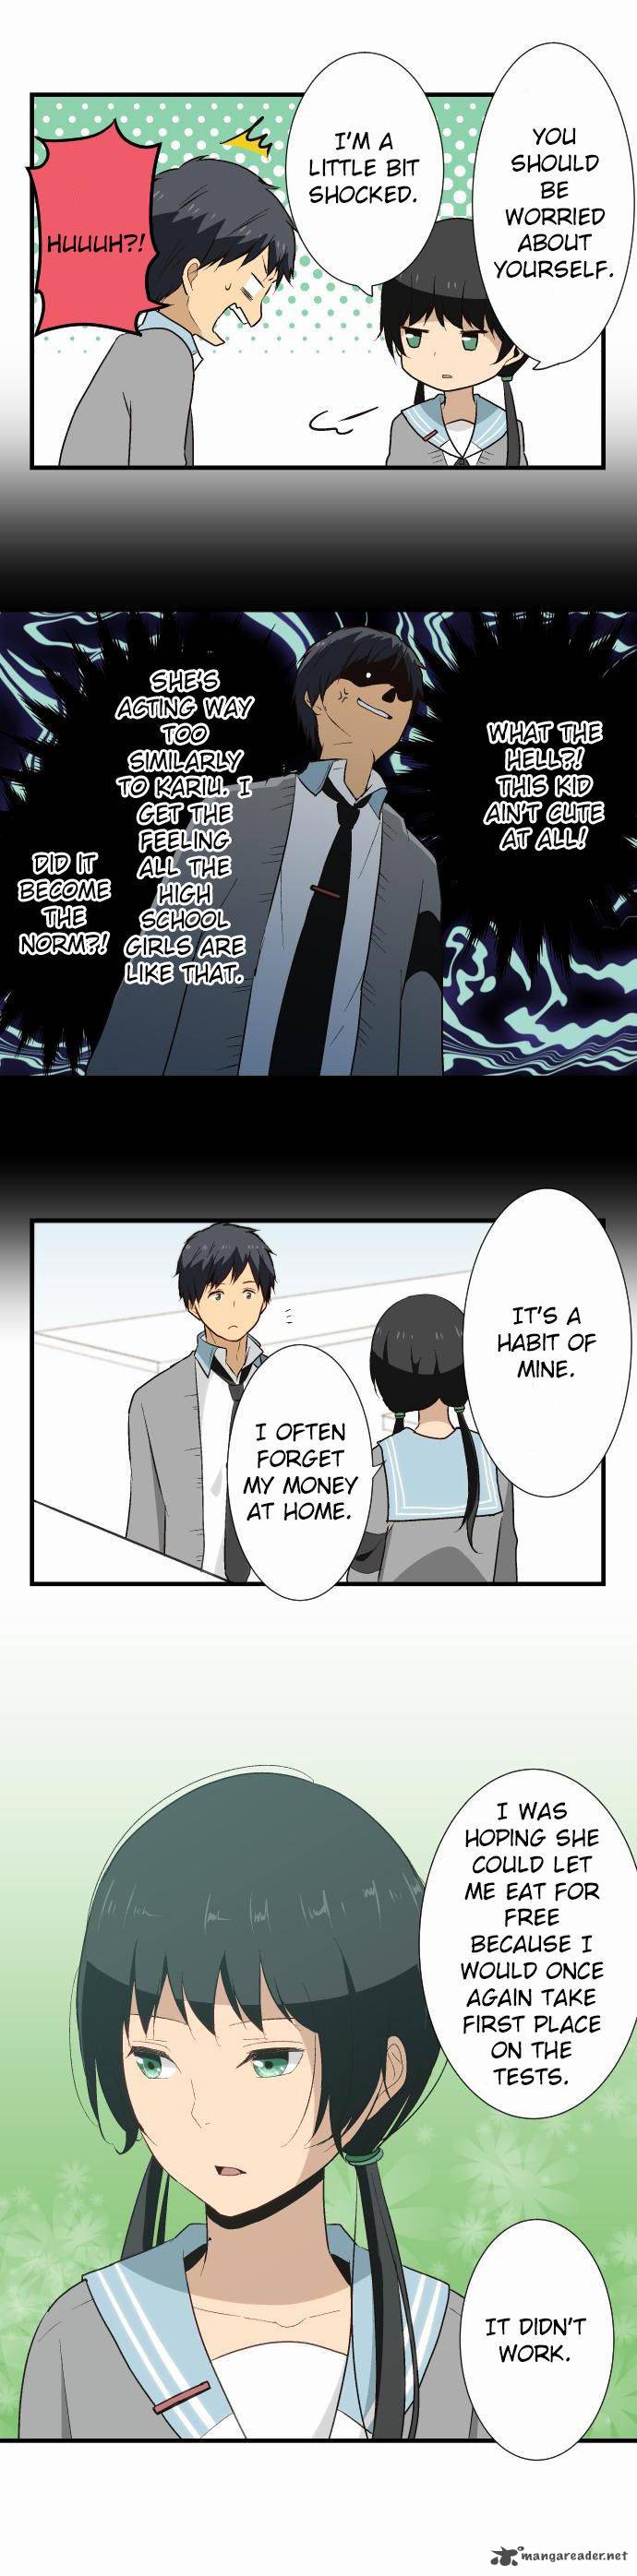 relife_14_6